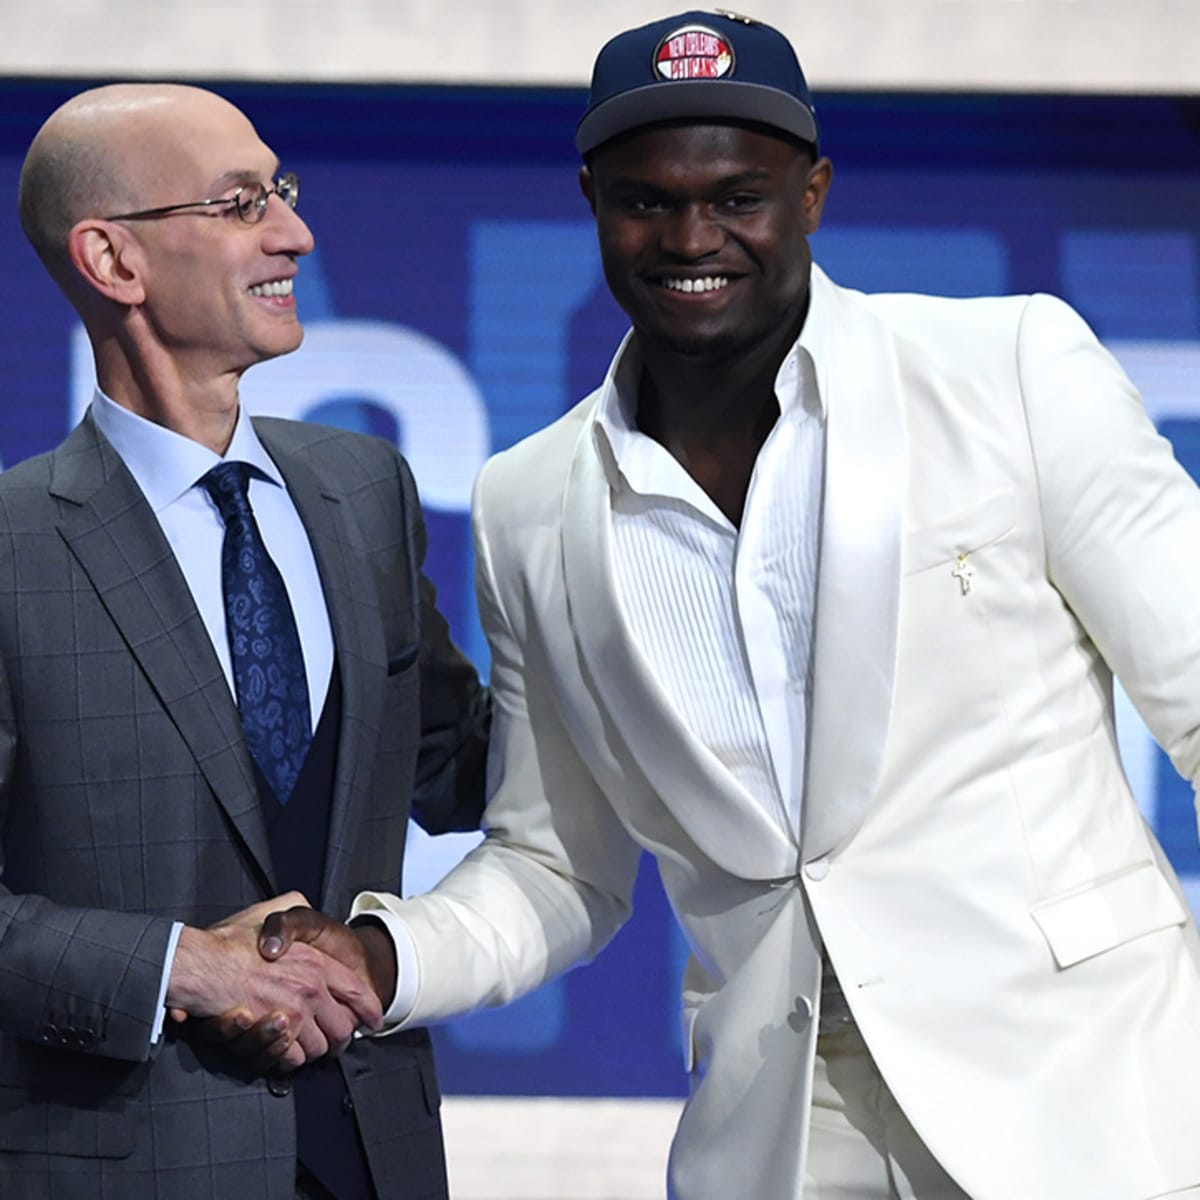 2019 NBA Draft comes with a side of hat confusions